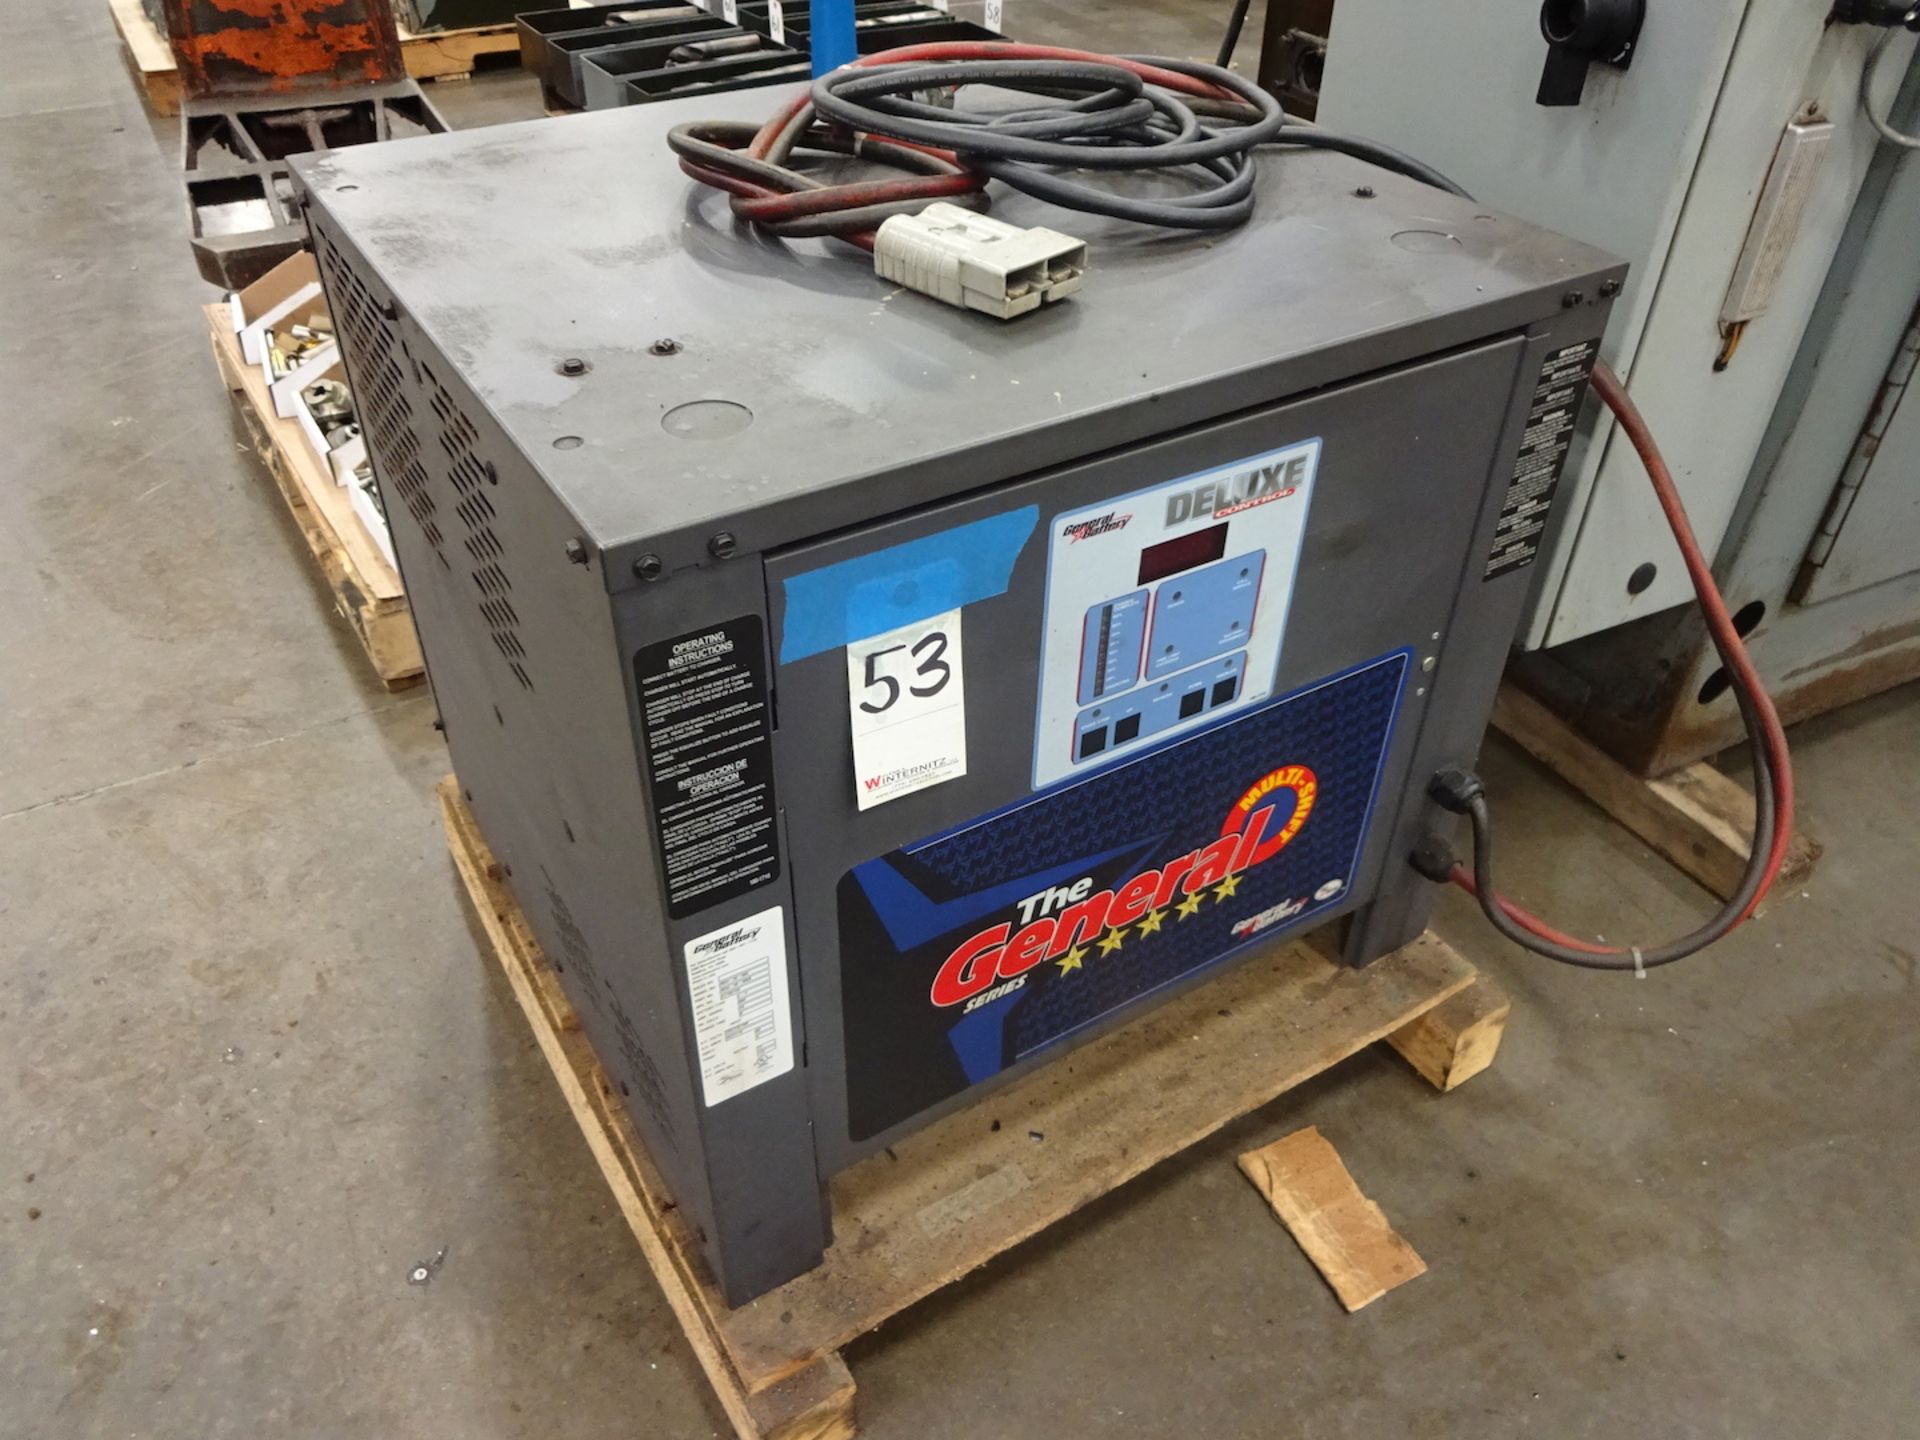 GENERAL BATTERY MODEL MX3-36-600 MULTI-SHIFT DELUXE CONTROL INDUSTRIAL BATTERY CHARGER - Image 2 of 2